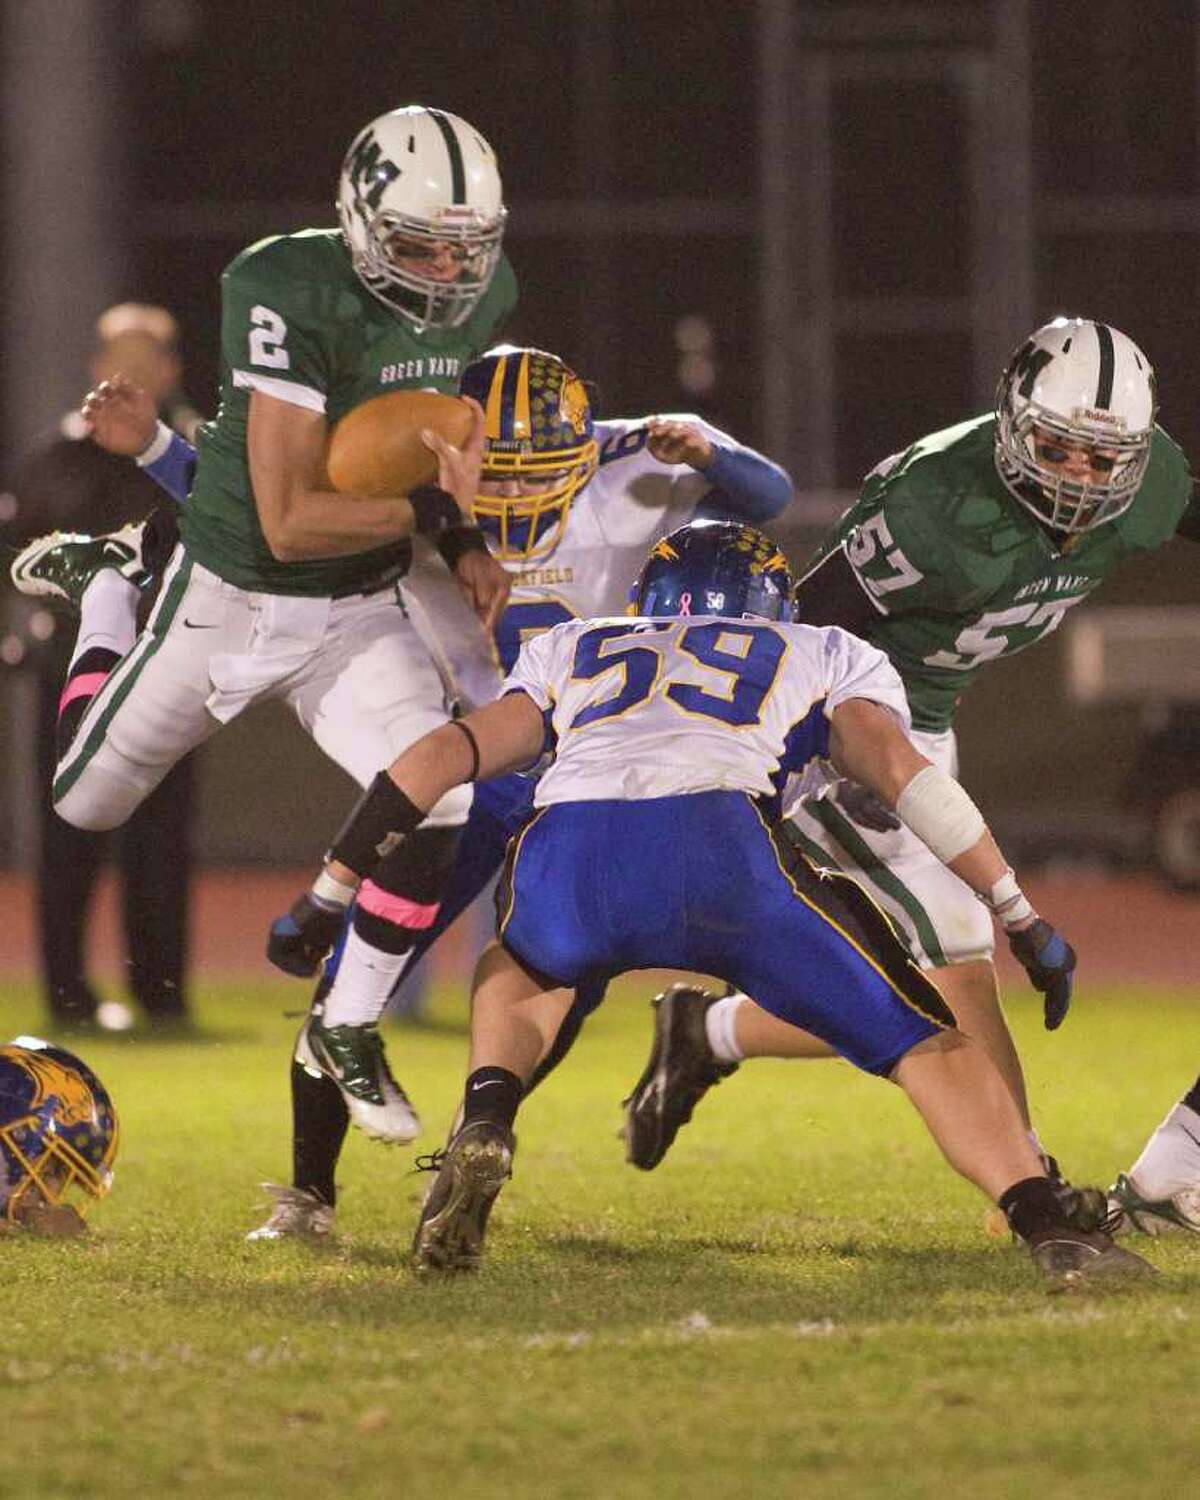 New Milford quarterback Karl Bradshaw (2) goes airborne, but Brookfield's Tyler Heckmann (59) is waiting for him when he comes down Friday night, Oct. 22, 2010, at New Milford High School.